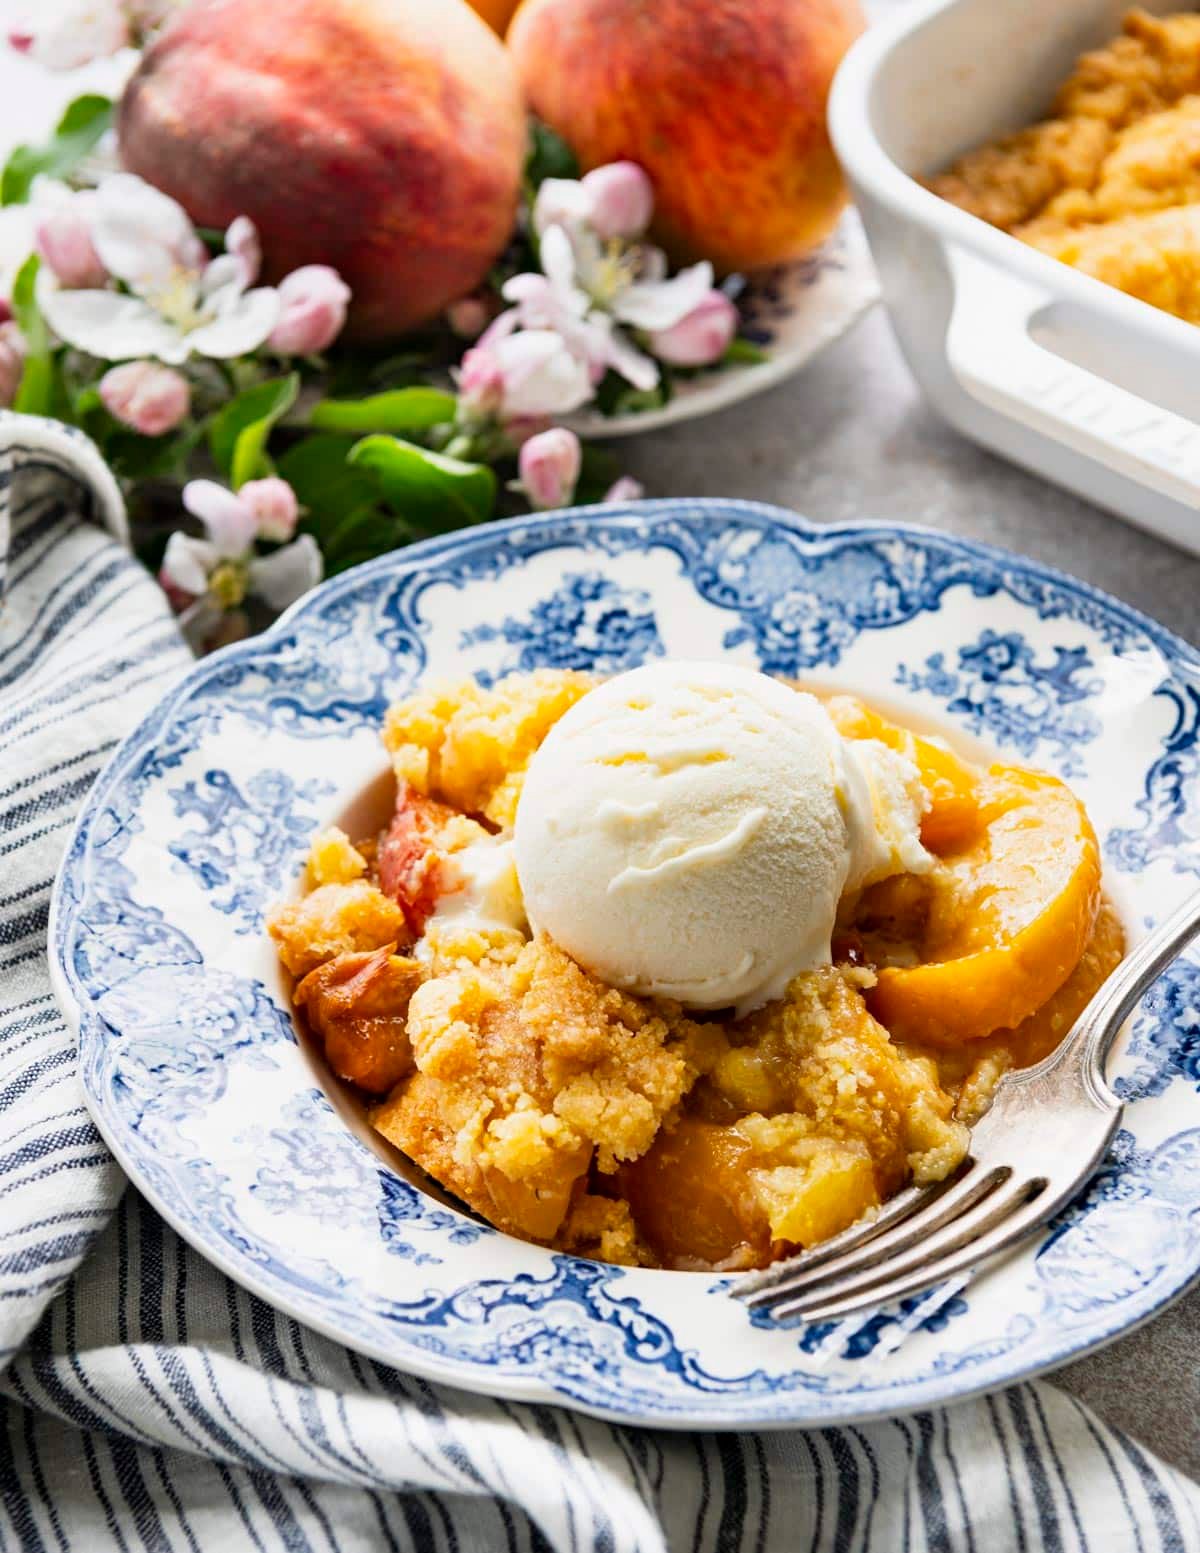 Front shot of a blue and white bowl full of Jiffy peach cobbler with ice cream on top.